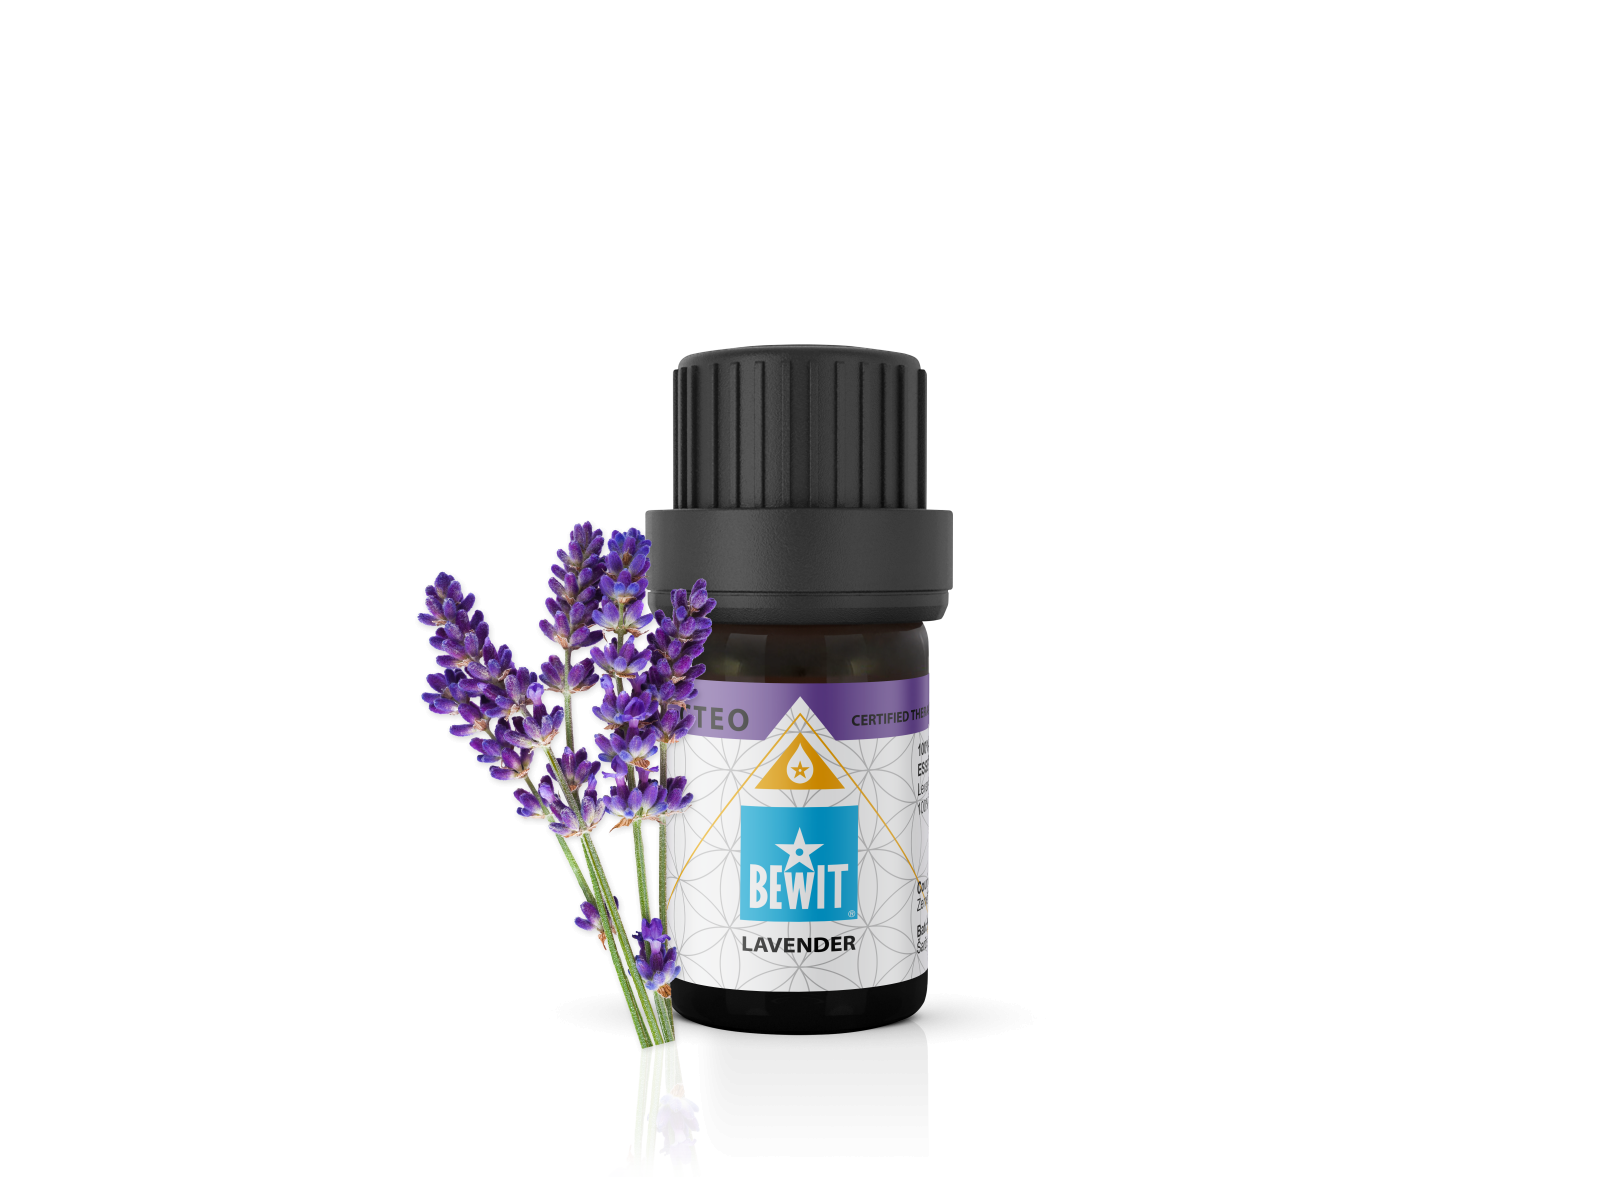 BEWIT Lavender - 100% pure and natural CTEO® essential oil - 3